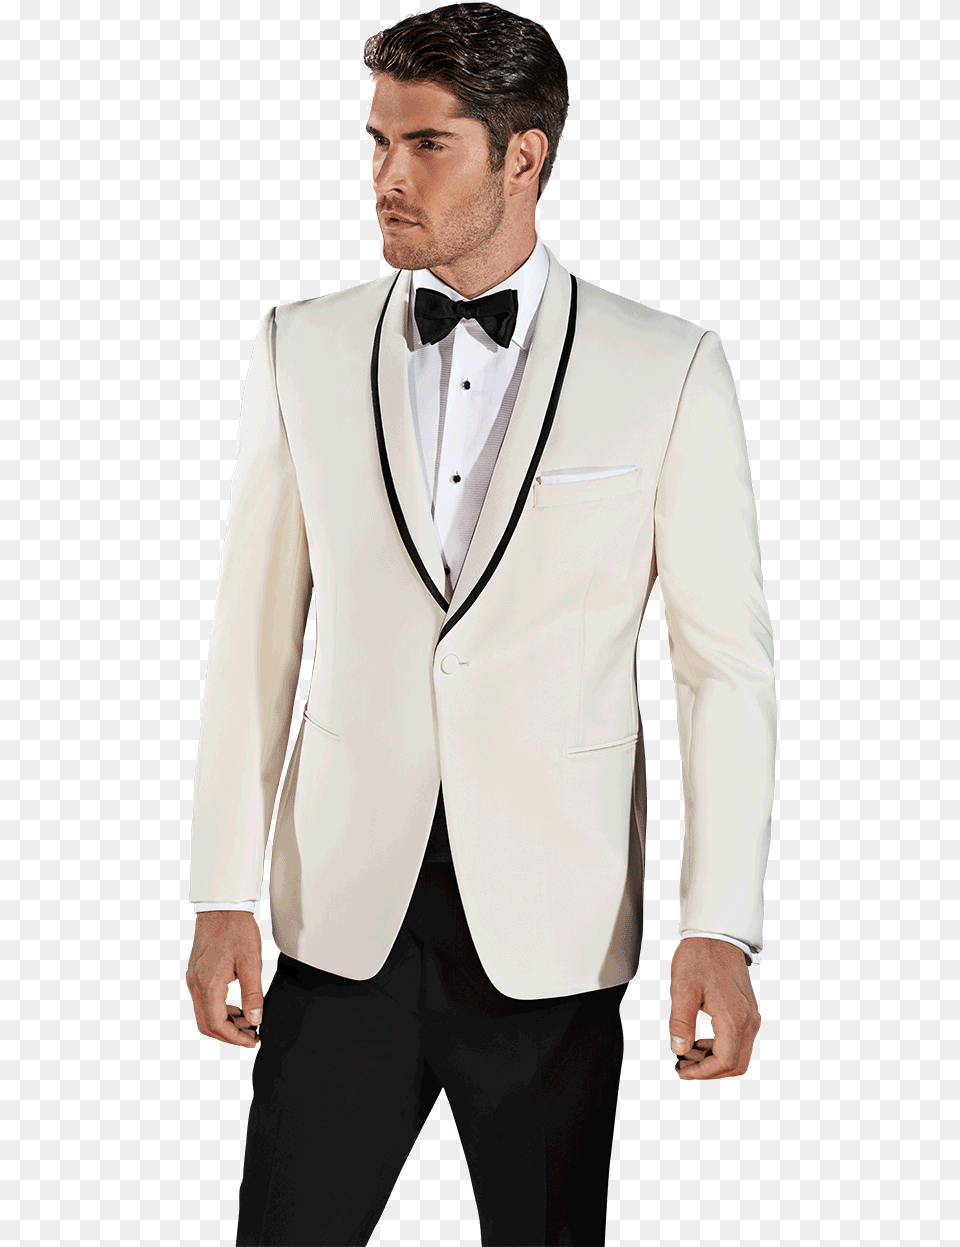 The White Waverly White And Black Tux, Clothing, Formal Wear, Shirt, Suit Png Image